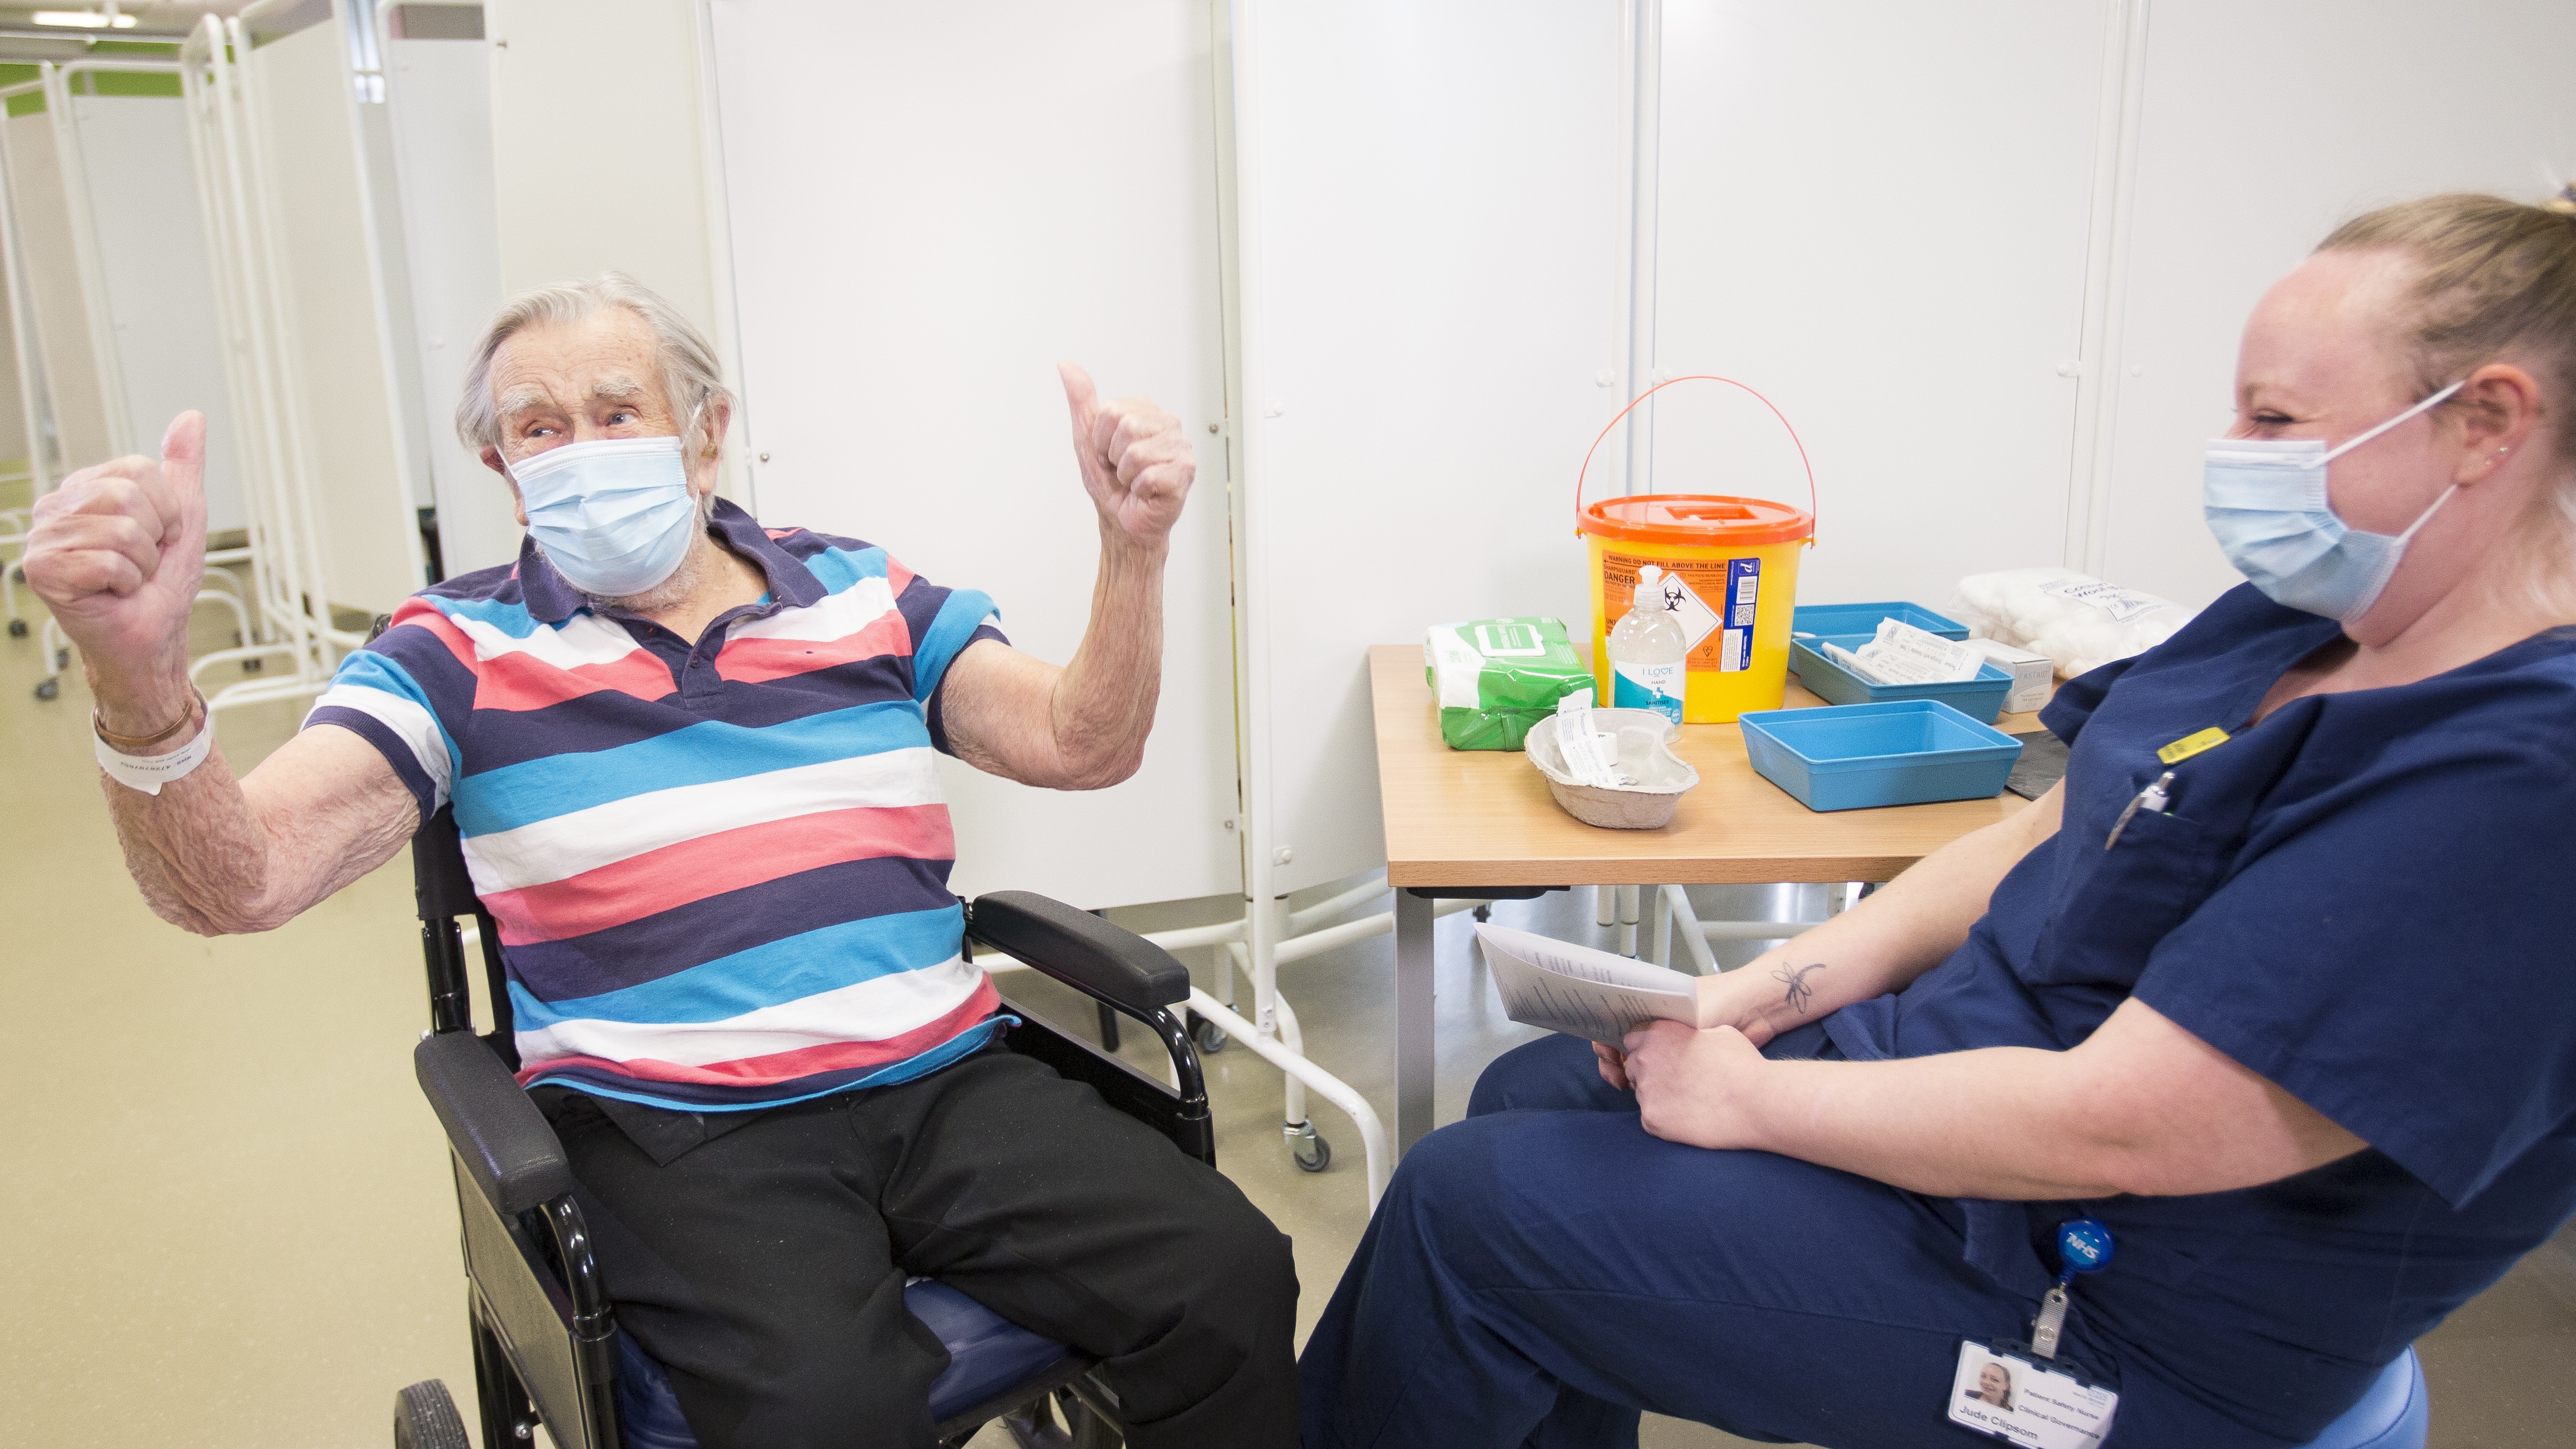 A patient celebrates getting his Covid vaccine at Southmead Hospital in Bristol